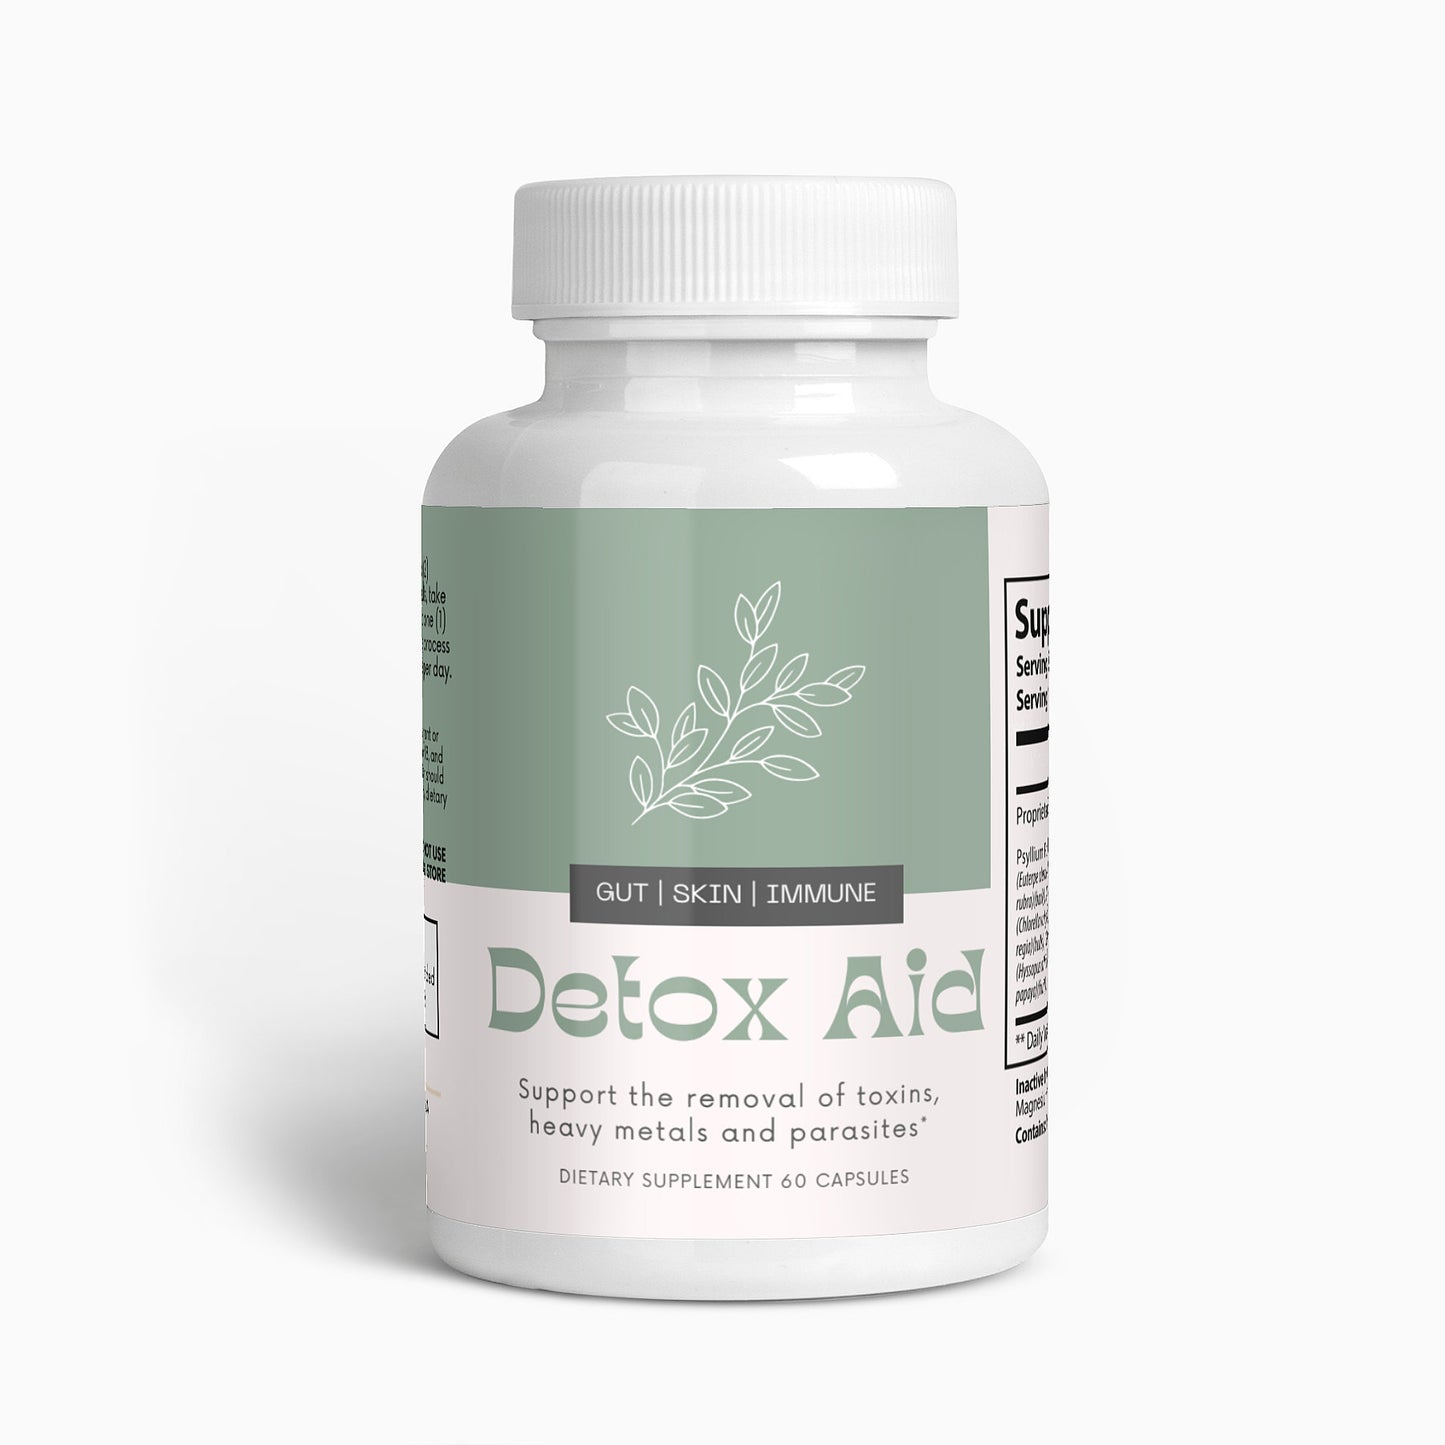 Detox Aid: natural support for the removal of toxins, heavy metals, and parasites